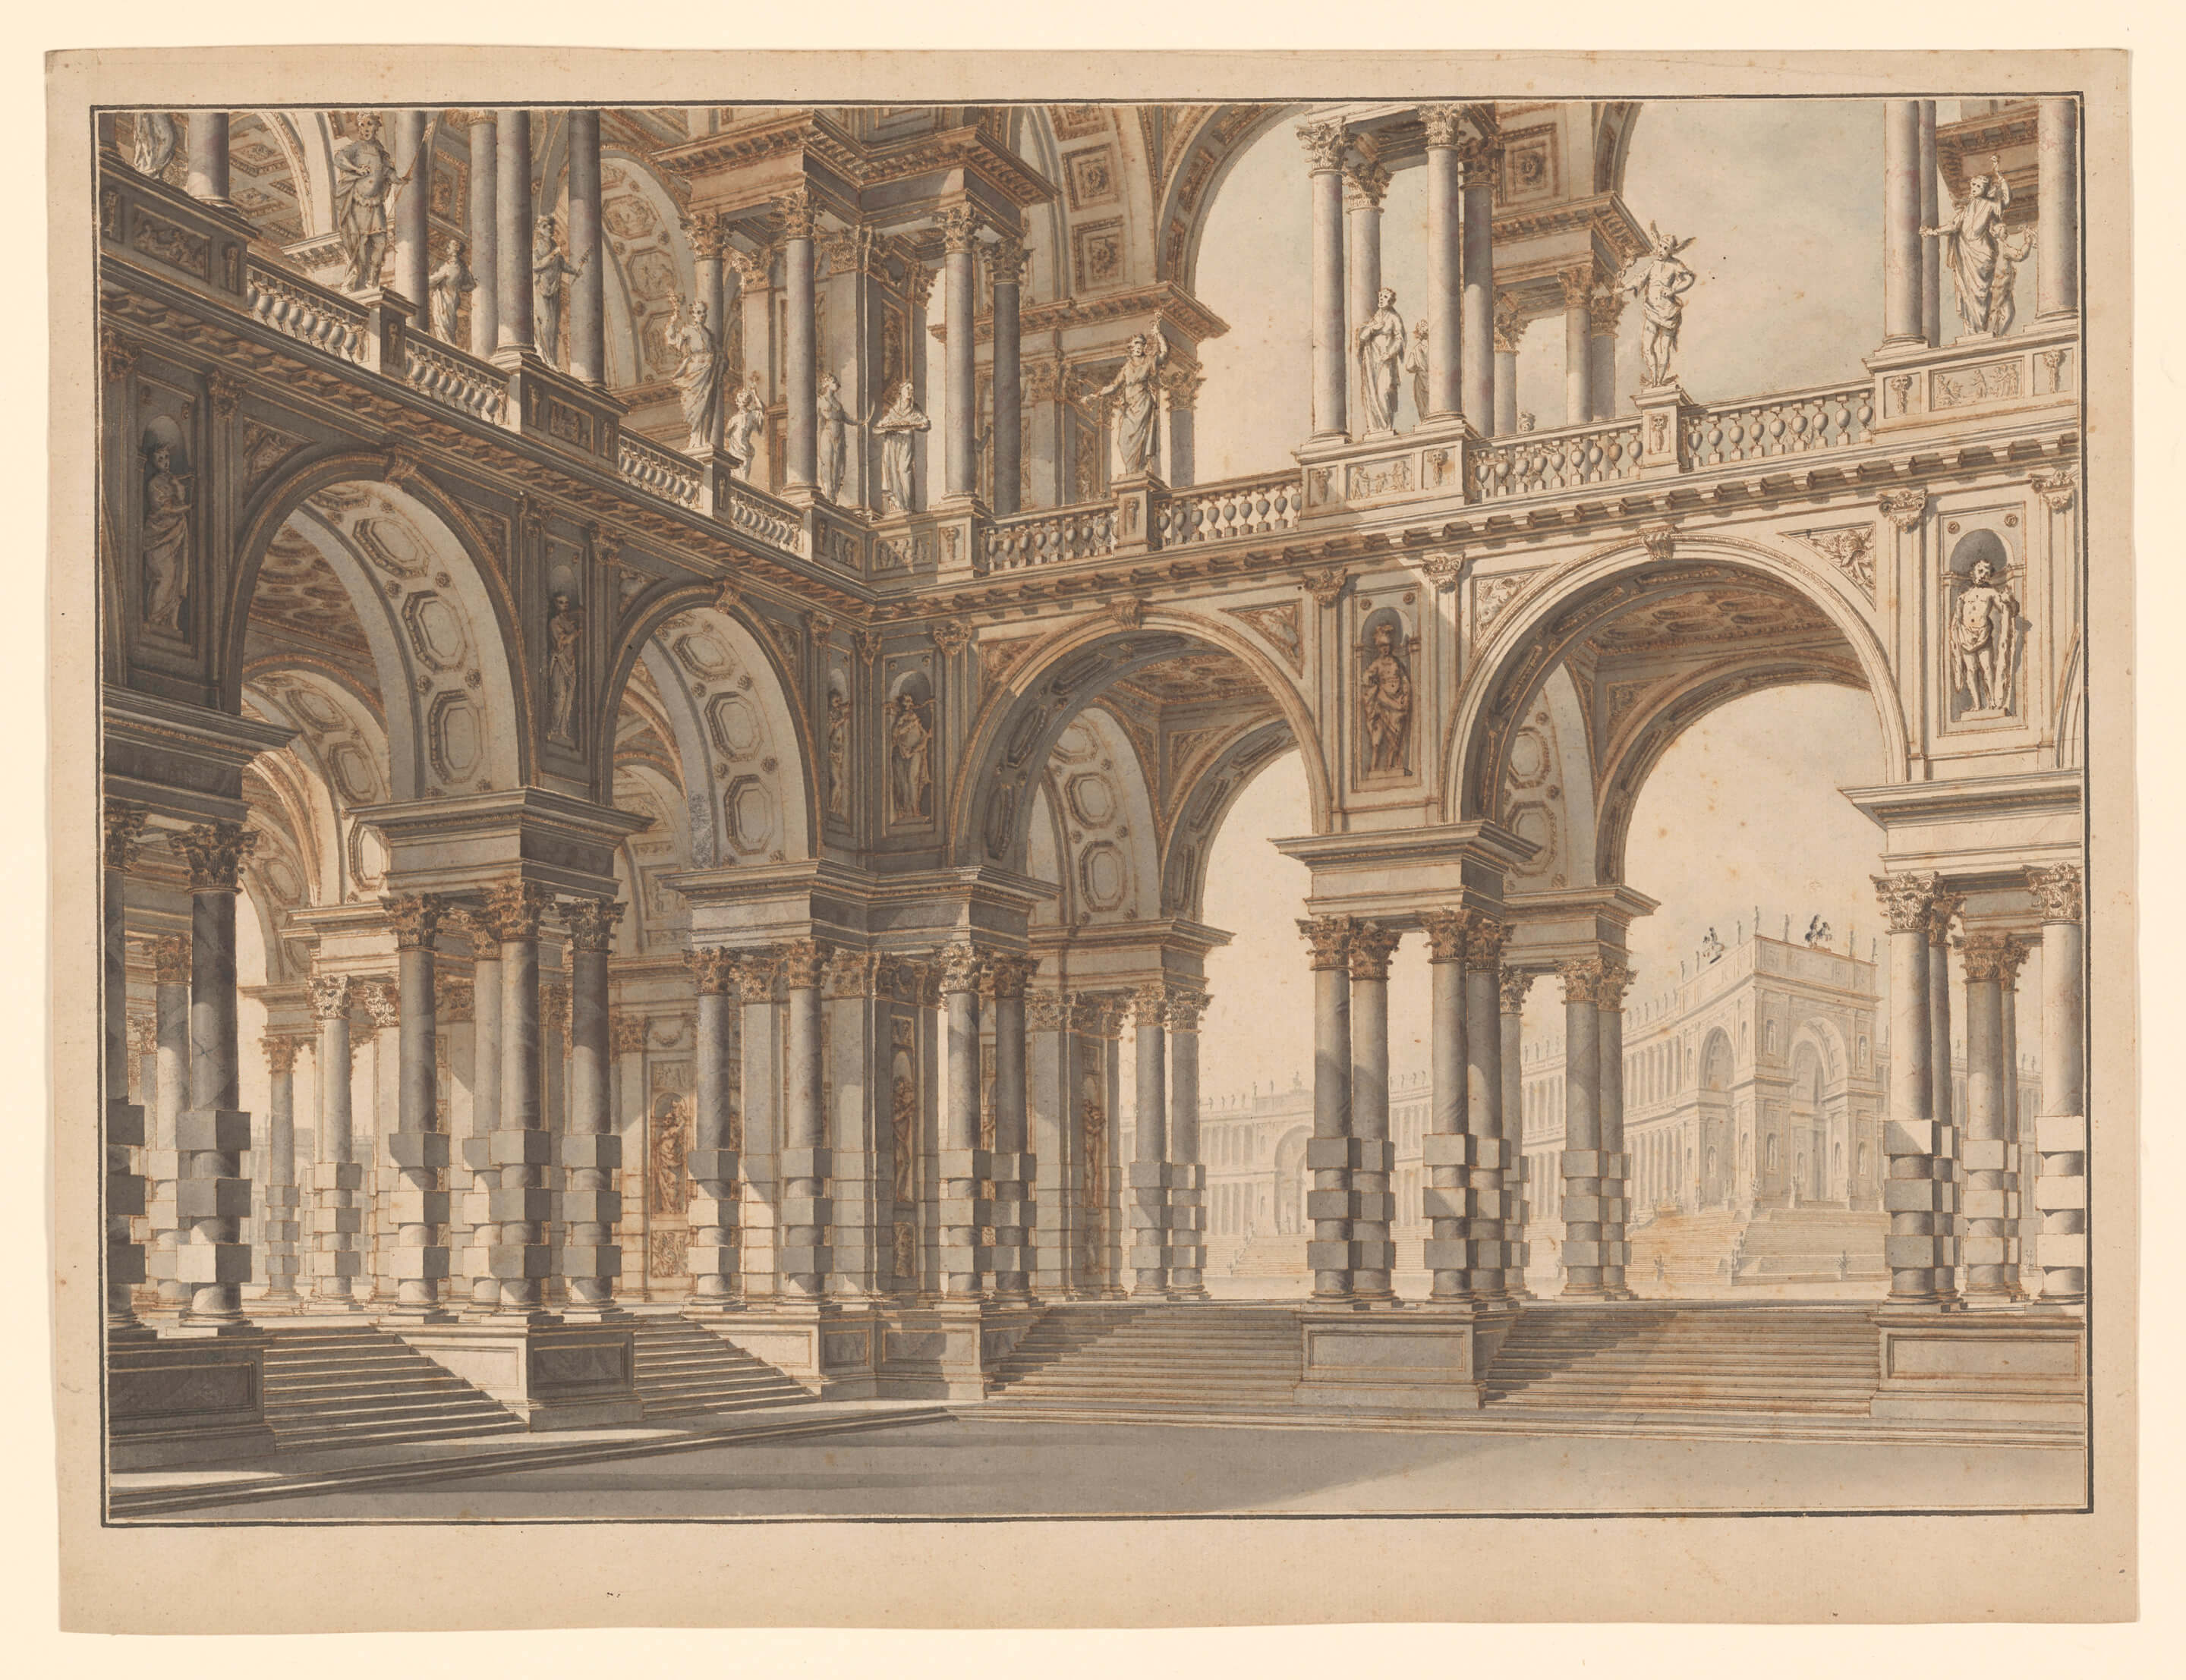 Set drawing by Giuseppe Galli Bibiena with colonnades and arcades. 